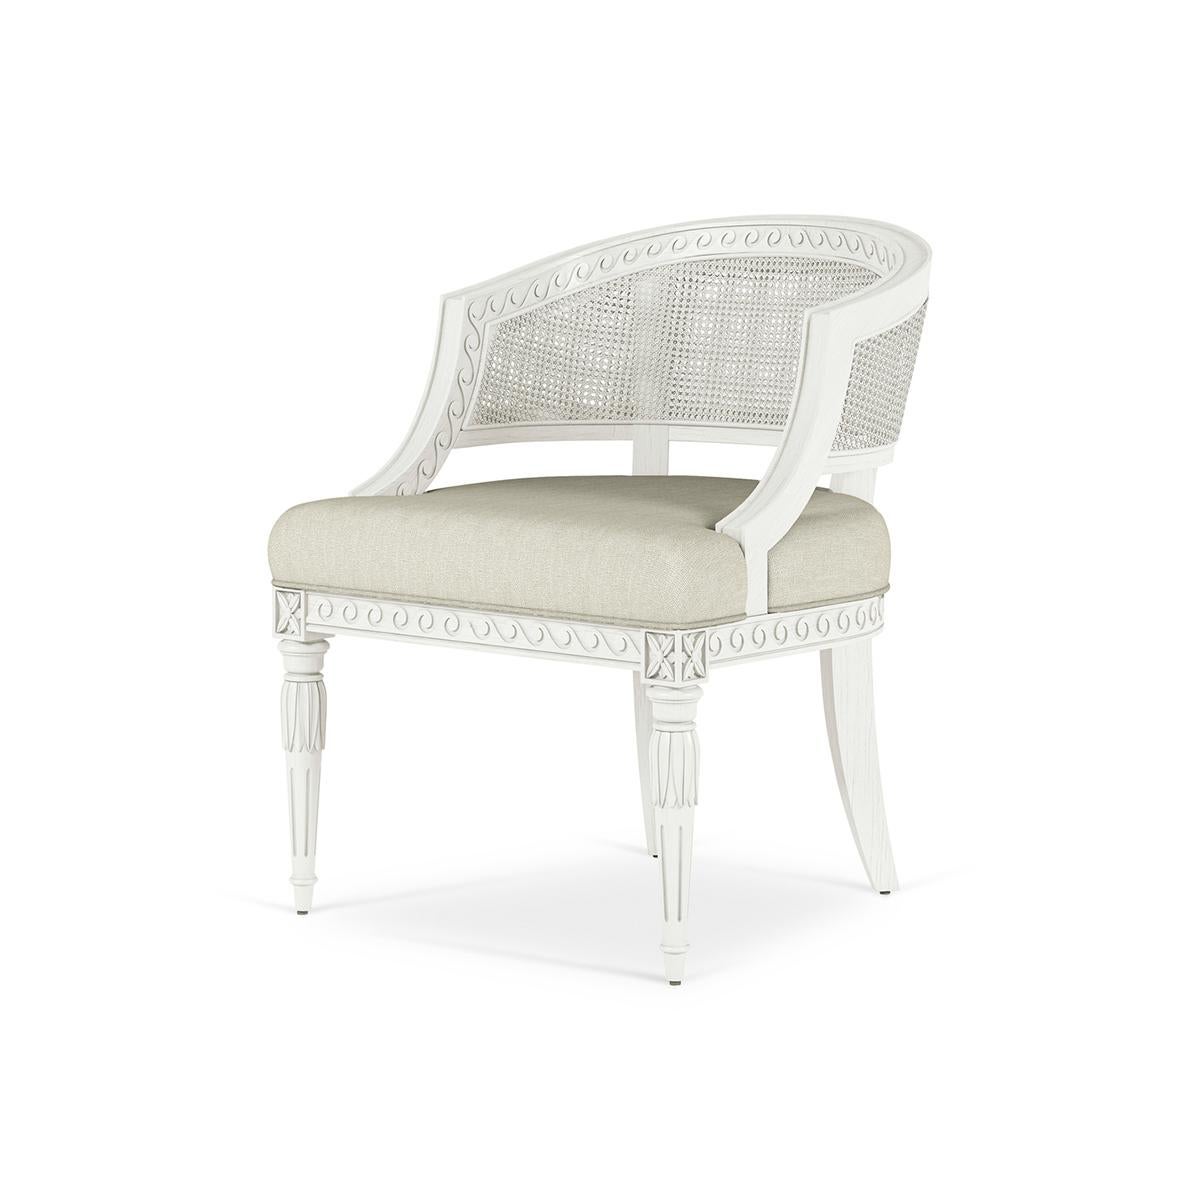 Swedish Neoclassic style painted Armchair, with a caned barrel back accented with carved Vitruvian scrolls, a tight seat upholstered in performance Belgian linen sits on exquisite fluted spindle legs for an elegant aesthetic with hints of European